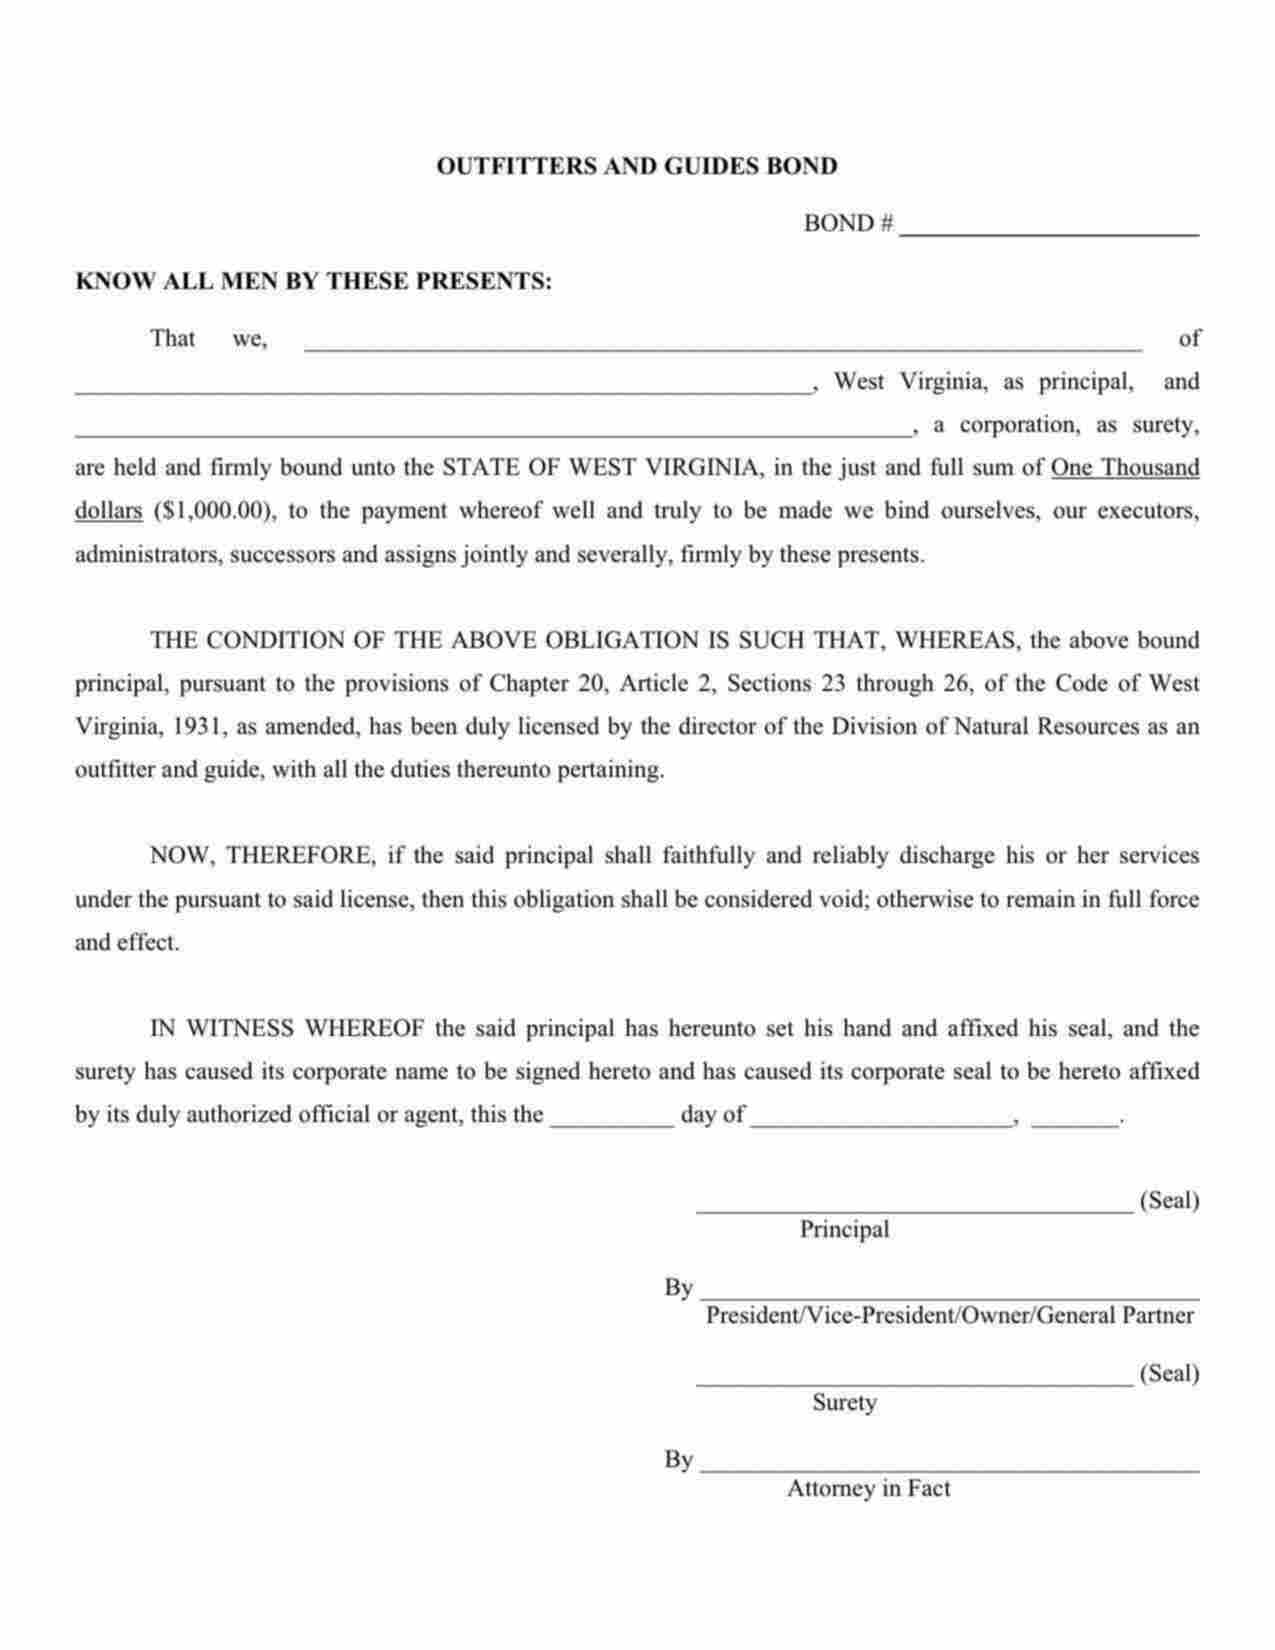 West Virginia Outfitters and Guides Bond Form